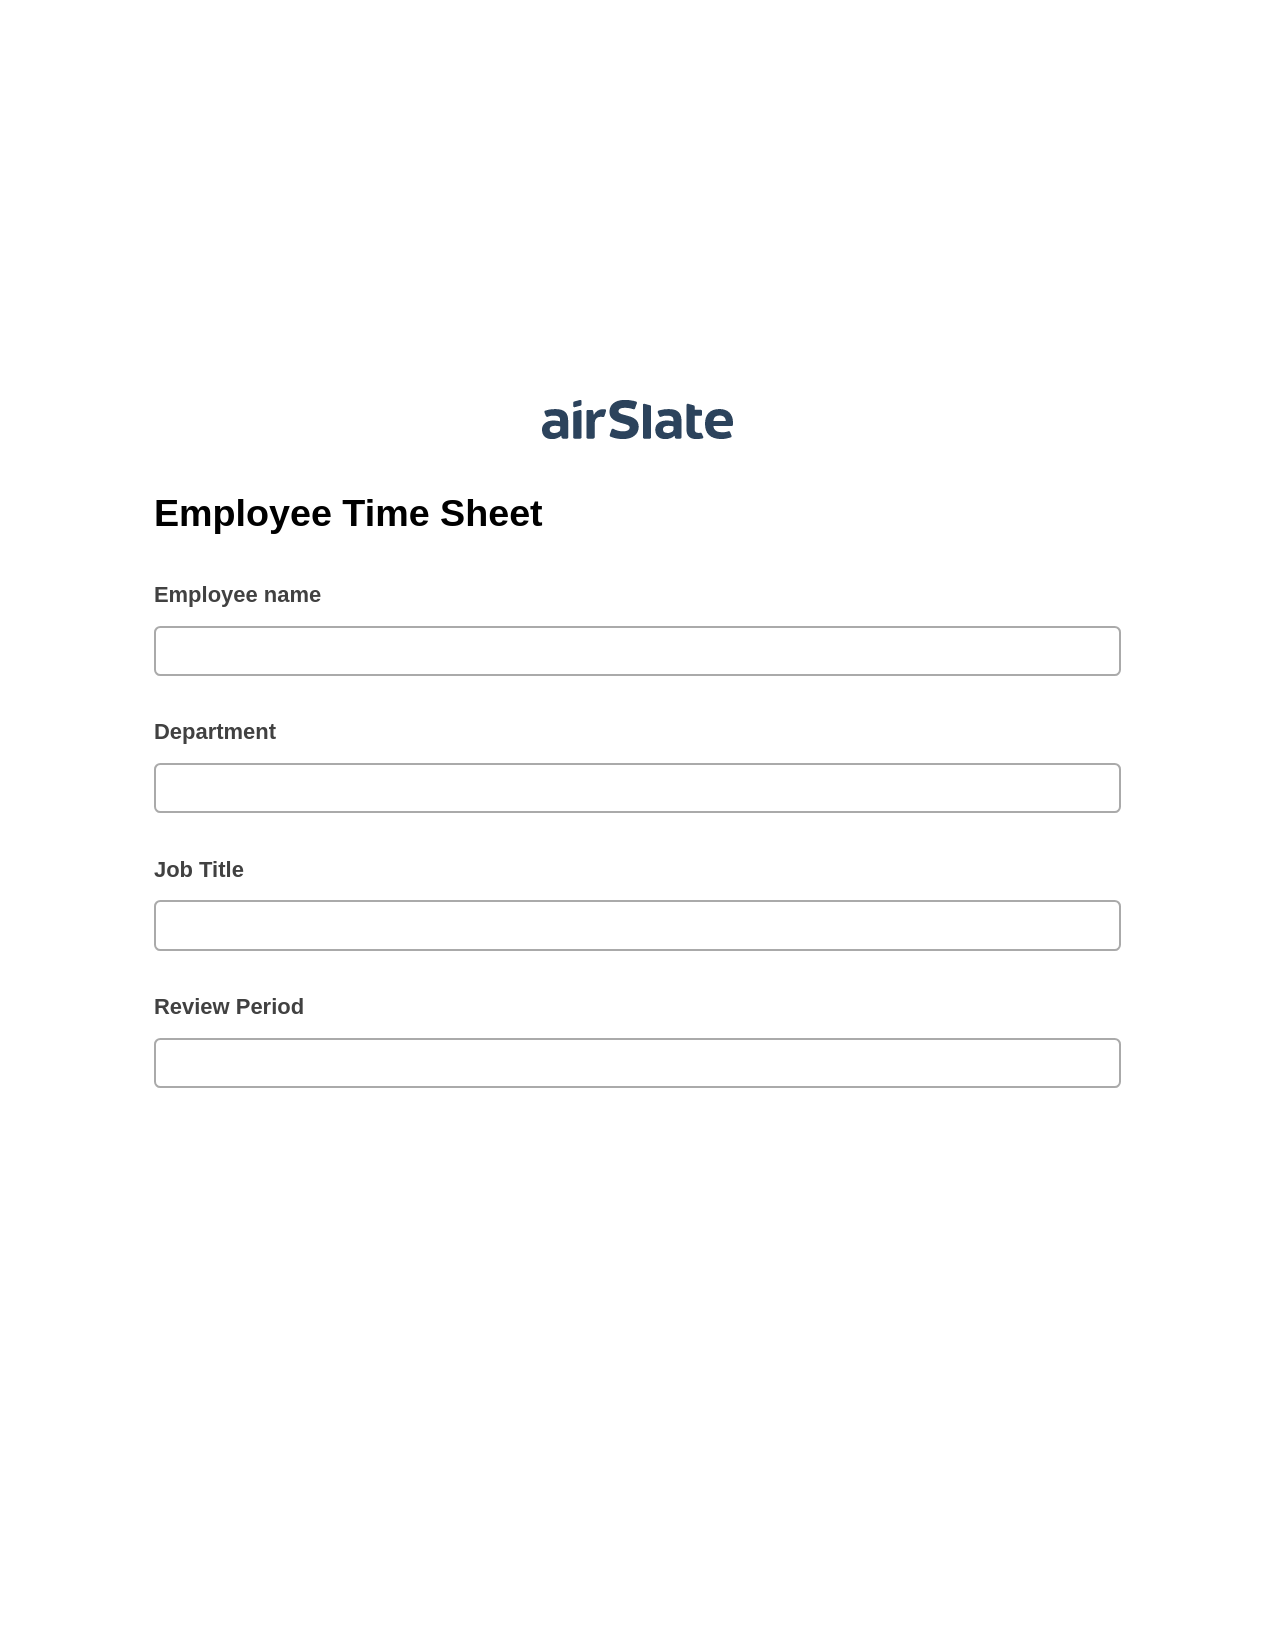 Multirole Employee Time Sheet Pre-fill Dropdowns from CSV file Bot, Create MS Dynamics 365 Records Bot, Export to Google Sheet Bot